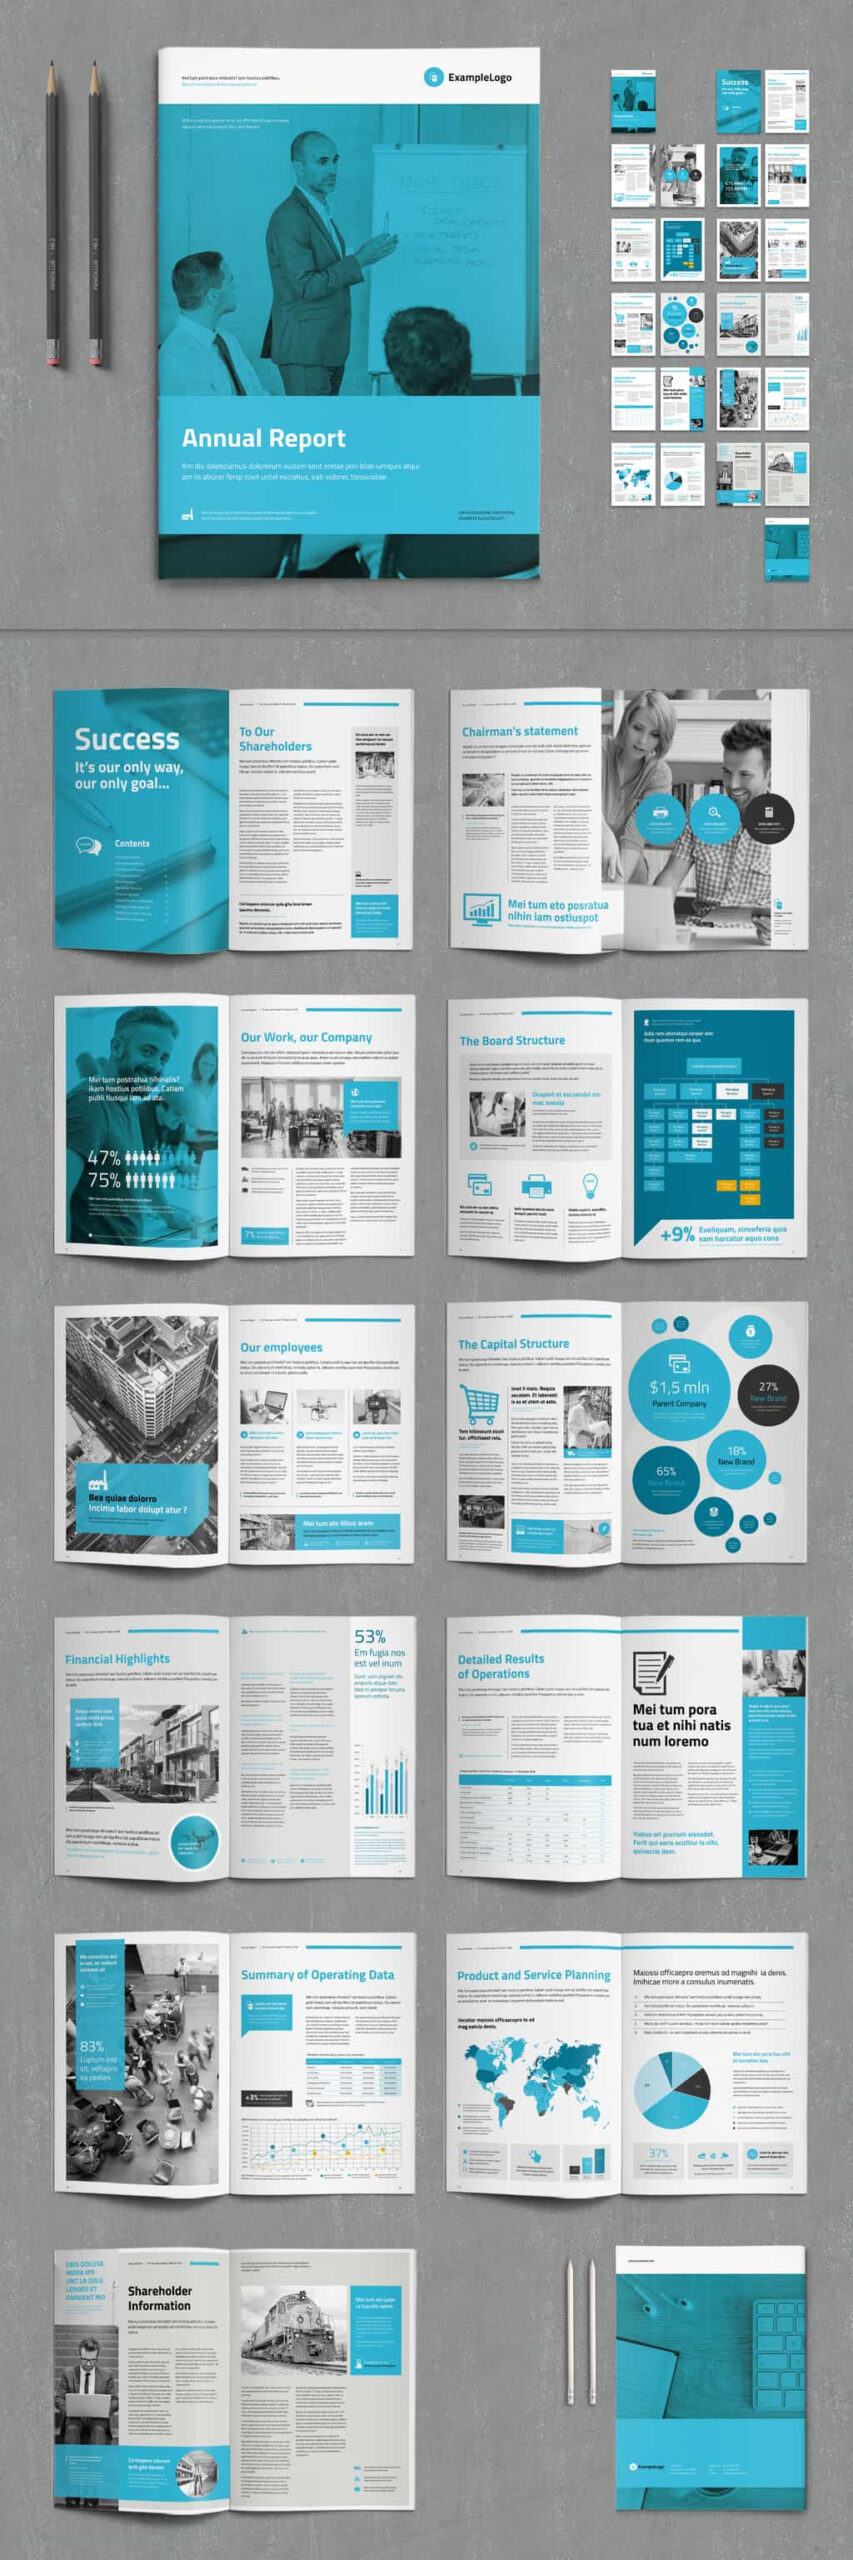 10 Modern Annual Report Design Templates [Free and Paid]  Redokun  For Chairman